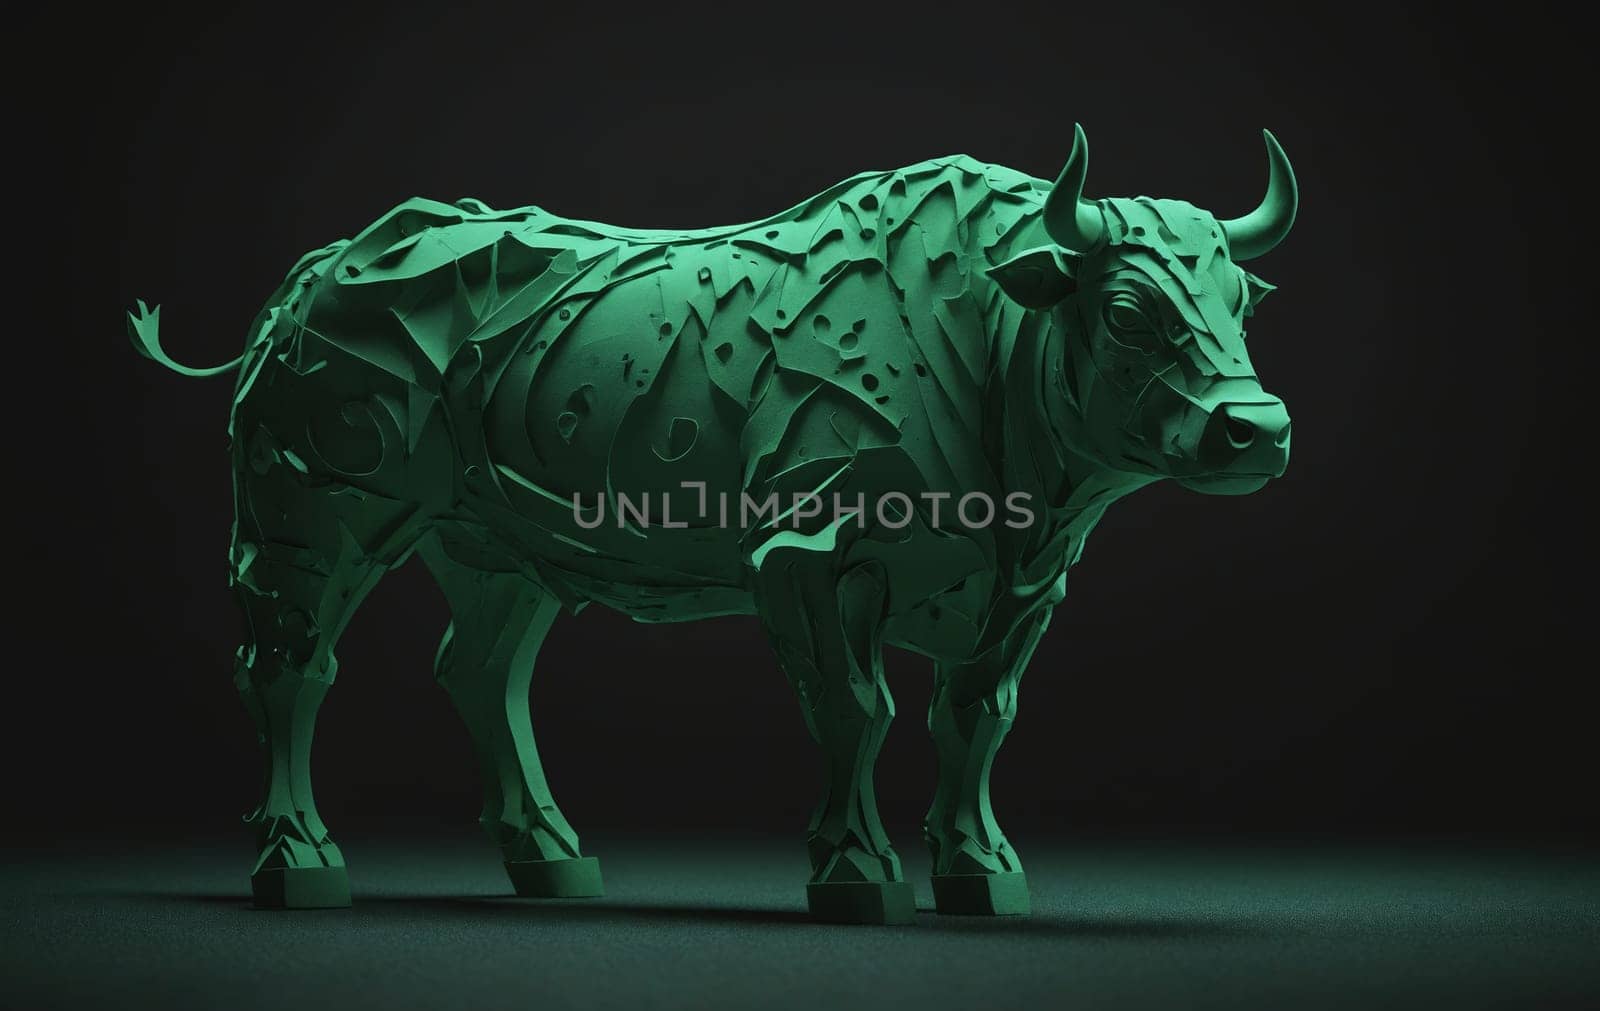 Low poly sculpture of a bull with horns and snout on a black background by Andre1ns